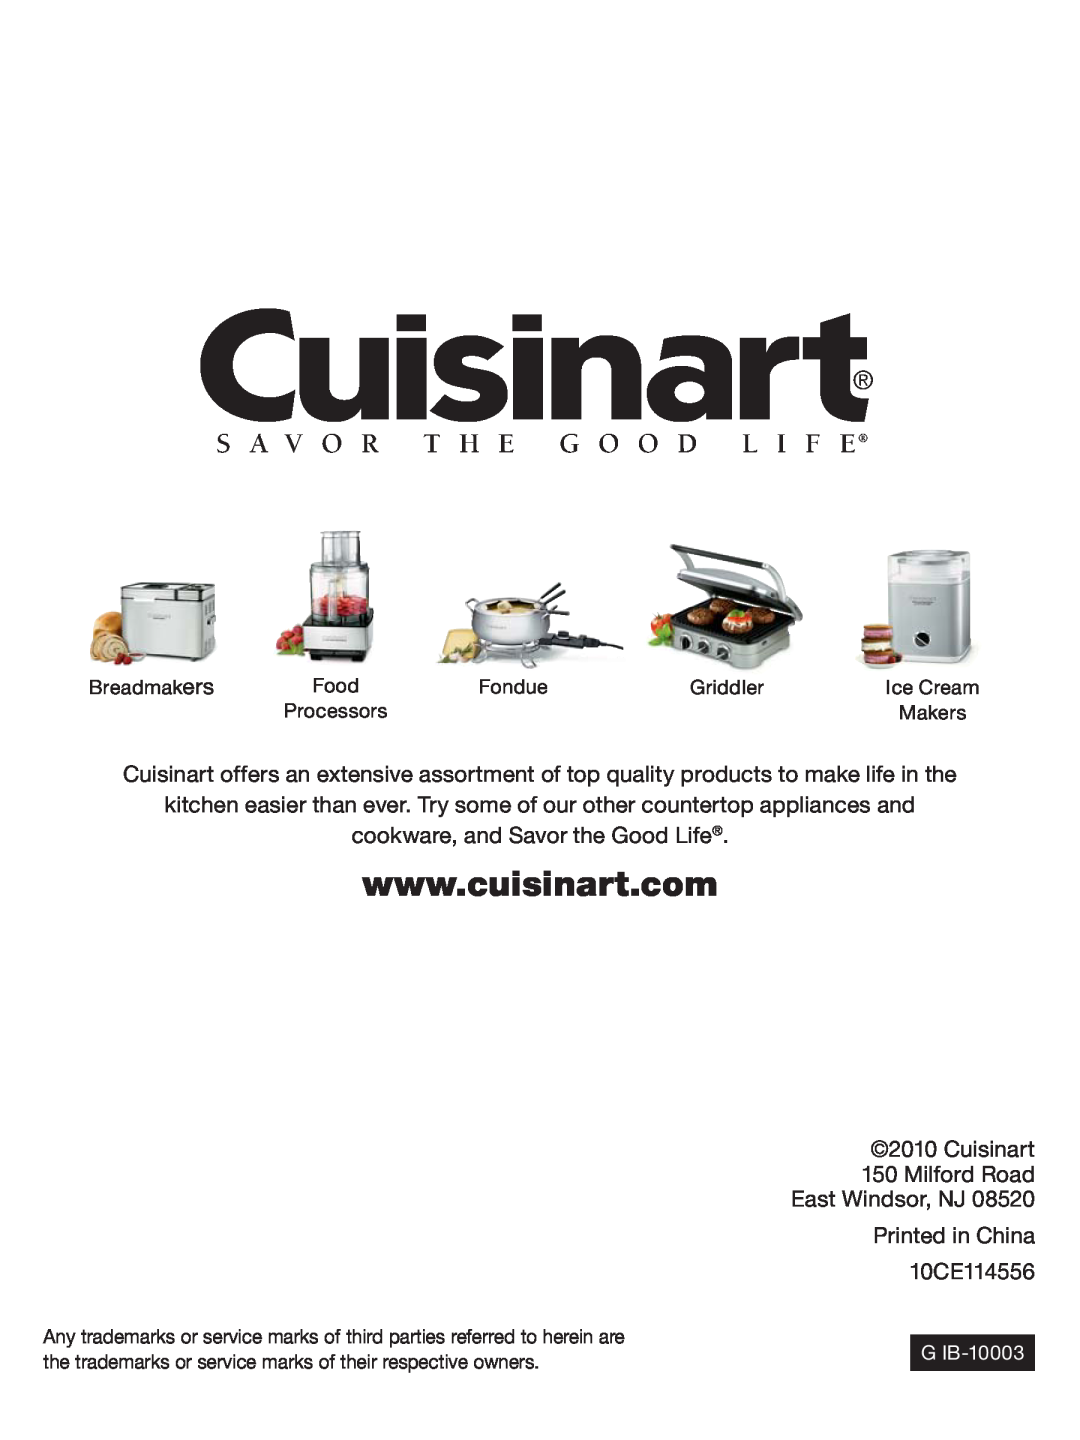 Cuisinart CWC-1200DZ, Dual Zone Private Reserve Wine Cellar manual cookware, and Savor the Good Life 